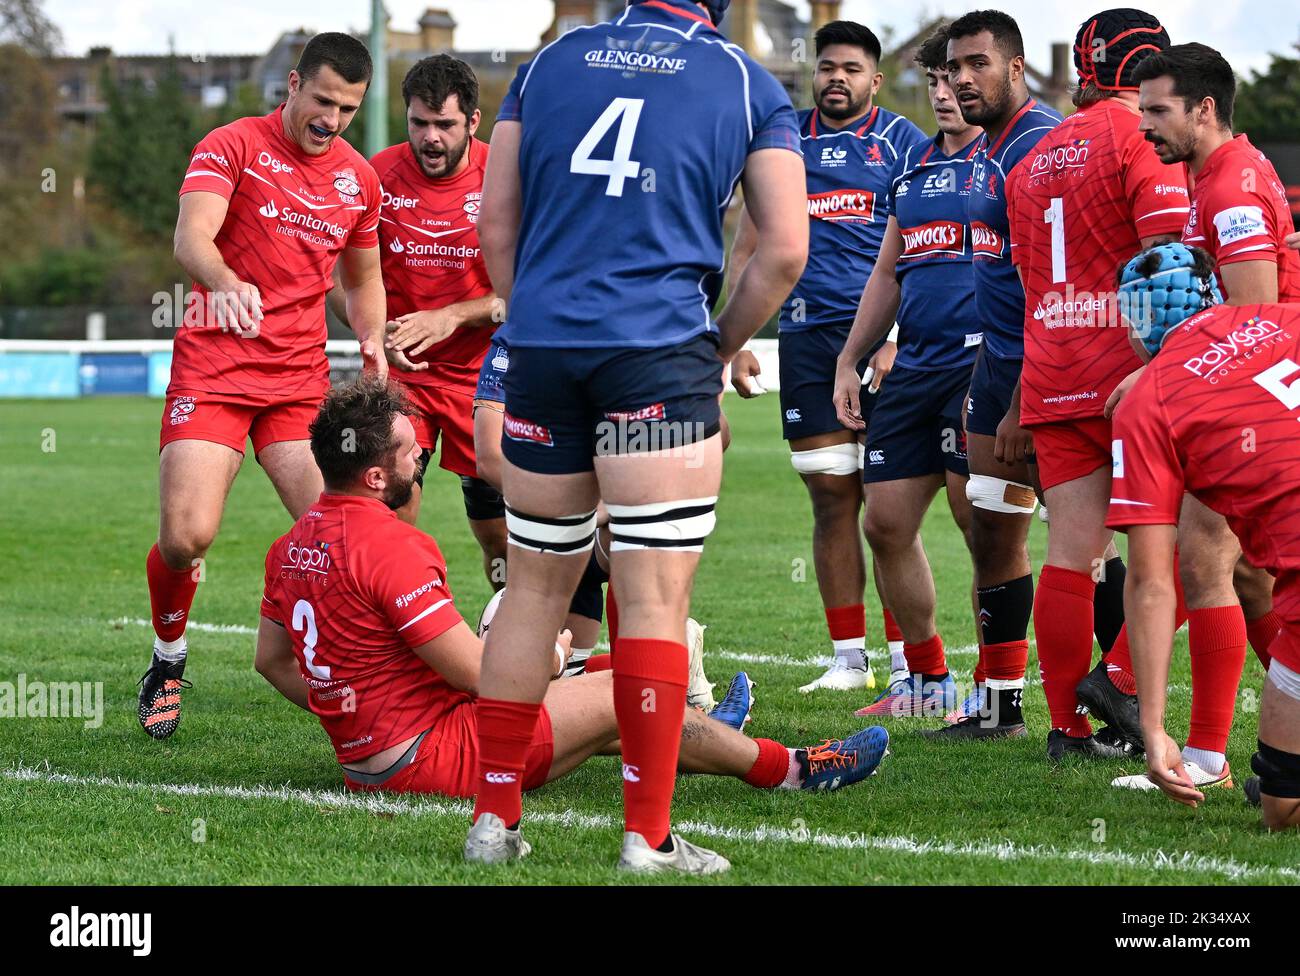 Richmond, United Kingdom. 24th Sep, 2022. Championship Rugby. London Scottish V Jersey Reds. The Richmond Athletic Ground. Richmond. Tryt scorer Eoghan Clarke (Jersey Reds, 2) is congratulated by his teammates during the London Scottish V Jersey Reds championship rugby match. Credit: Sport In Pictures/Alamy Live News Stock Photo